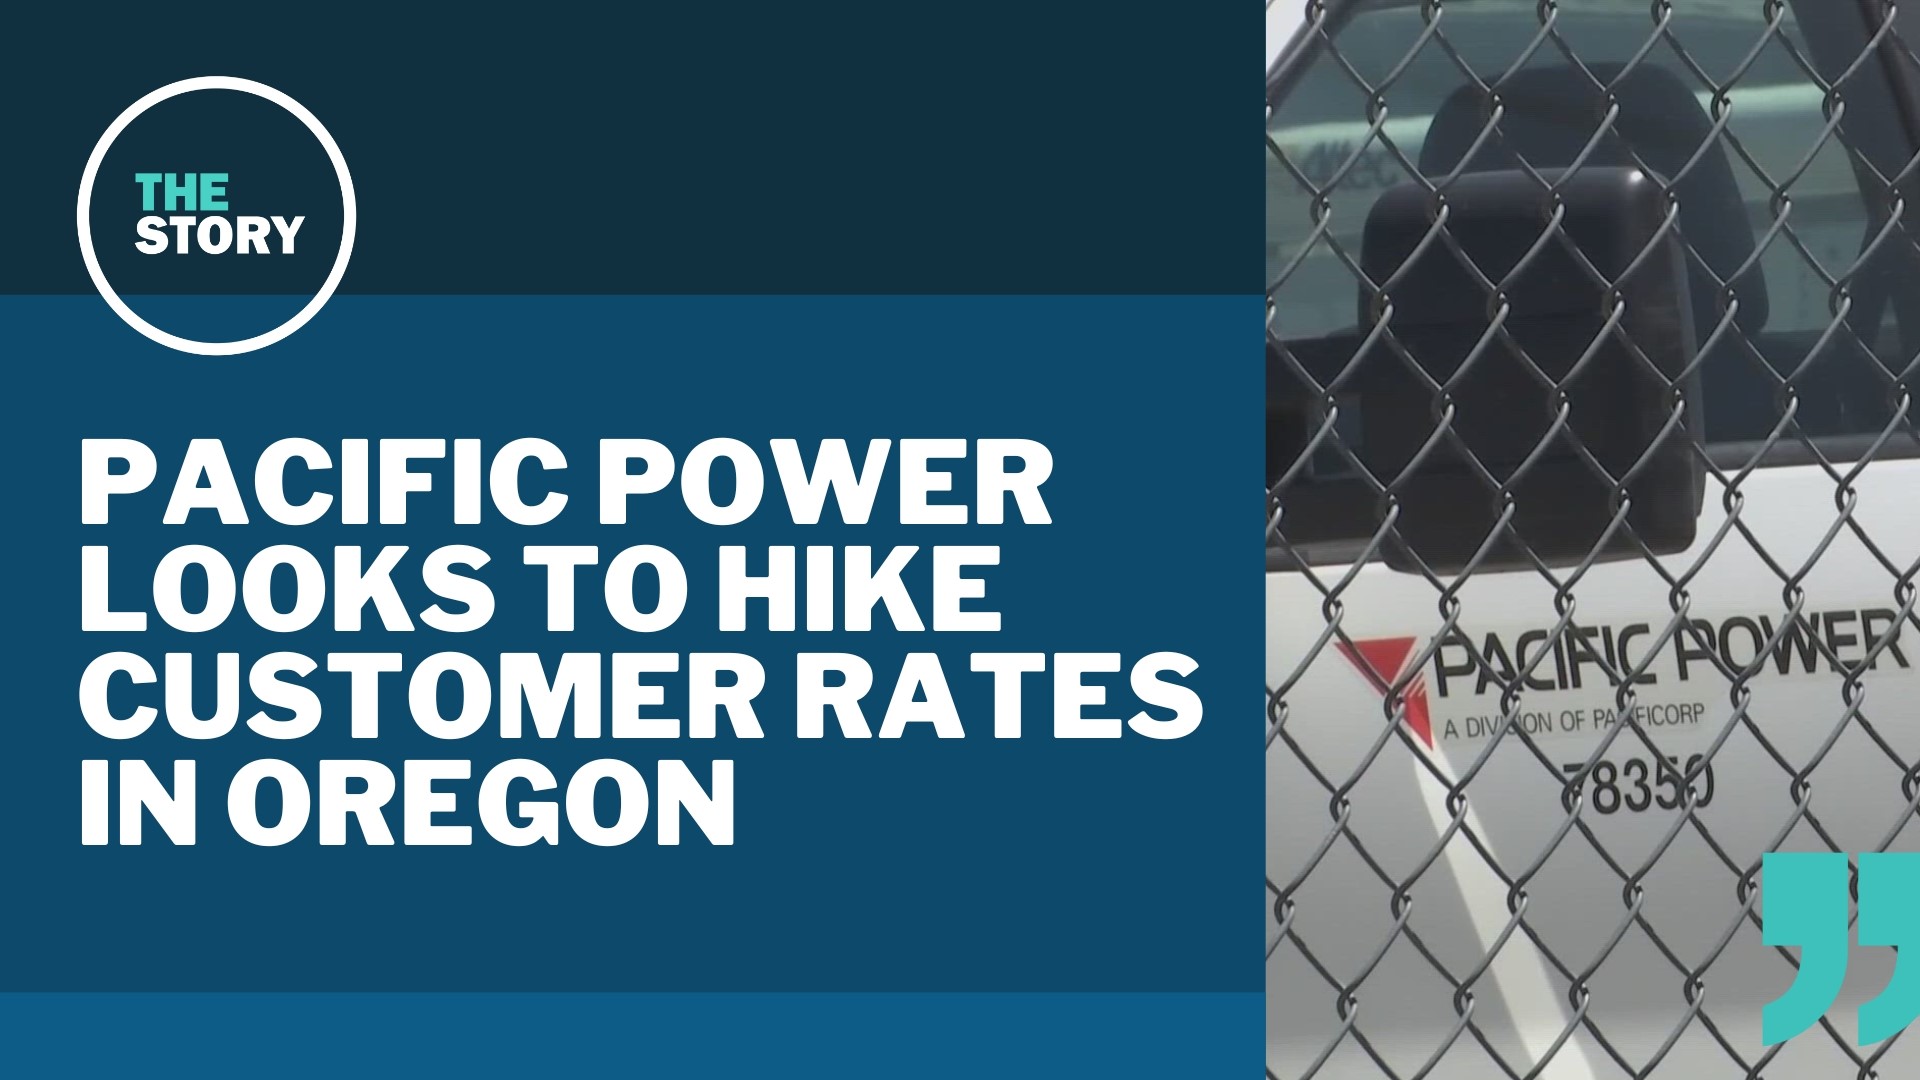 The utility company has requested a hike of 16.9% with the Oregon Public Utility Commission, which will decide whether to approve them.